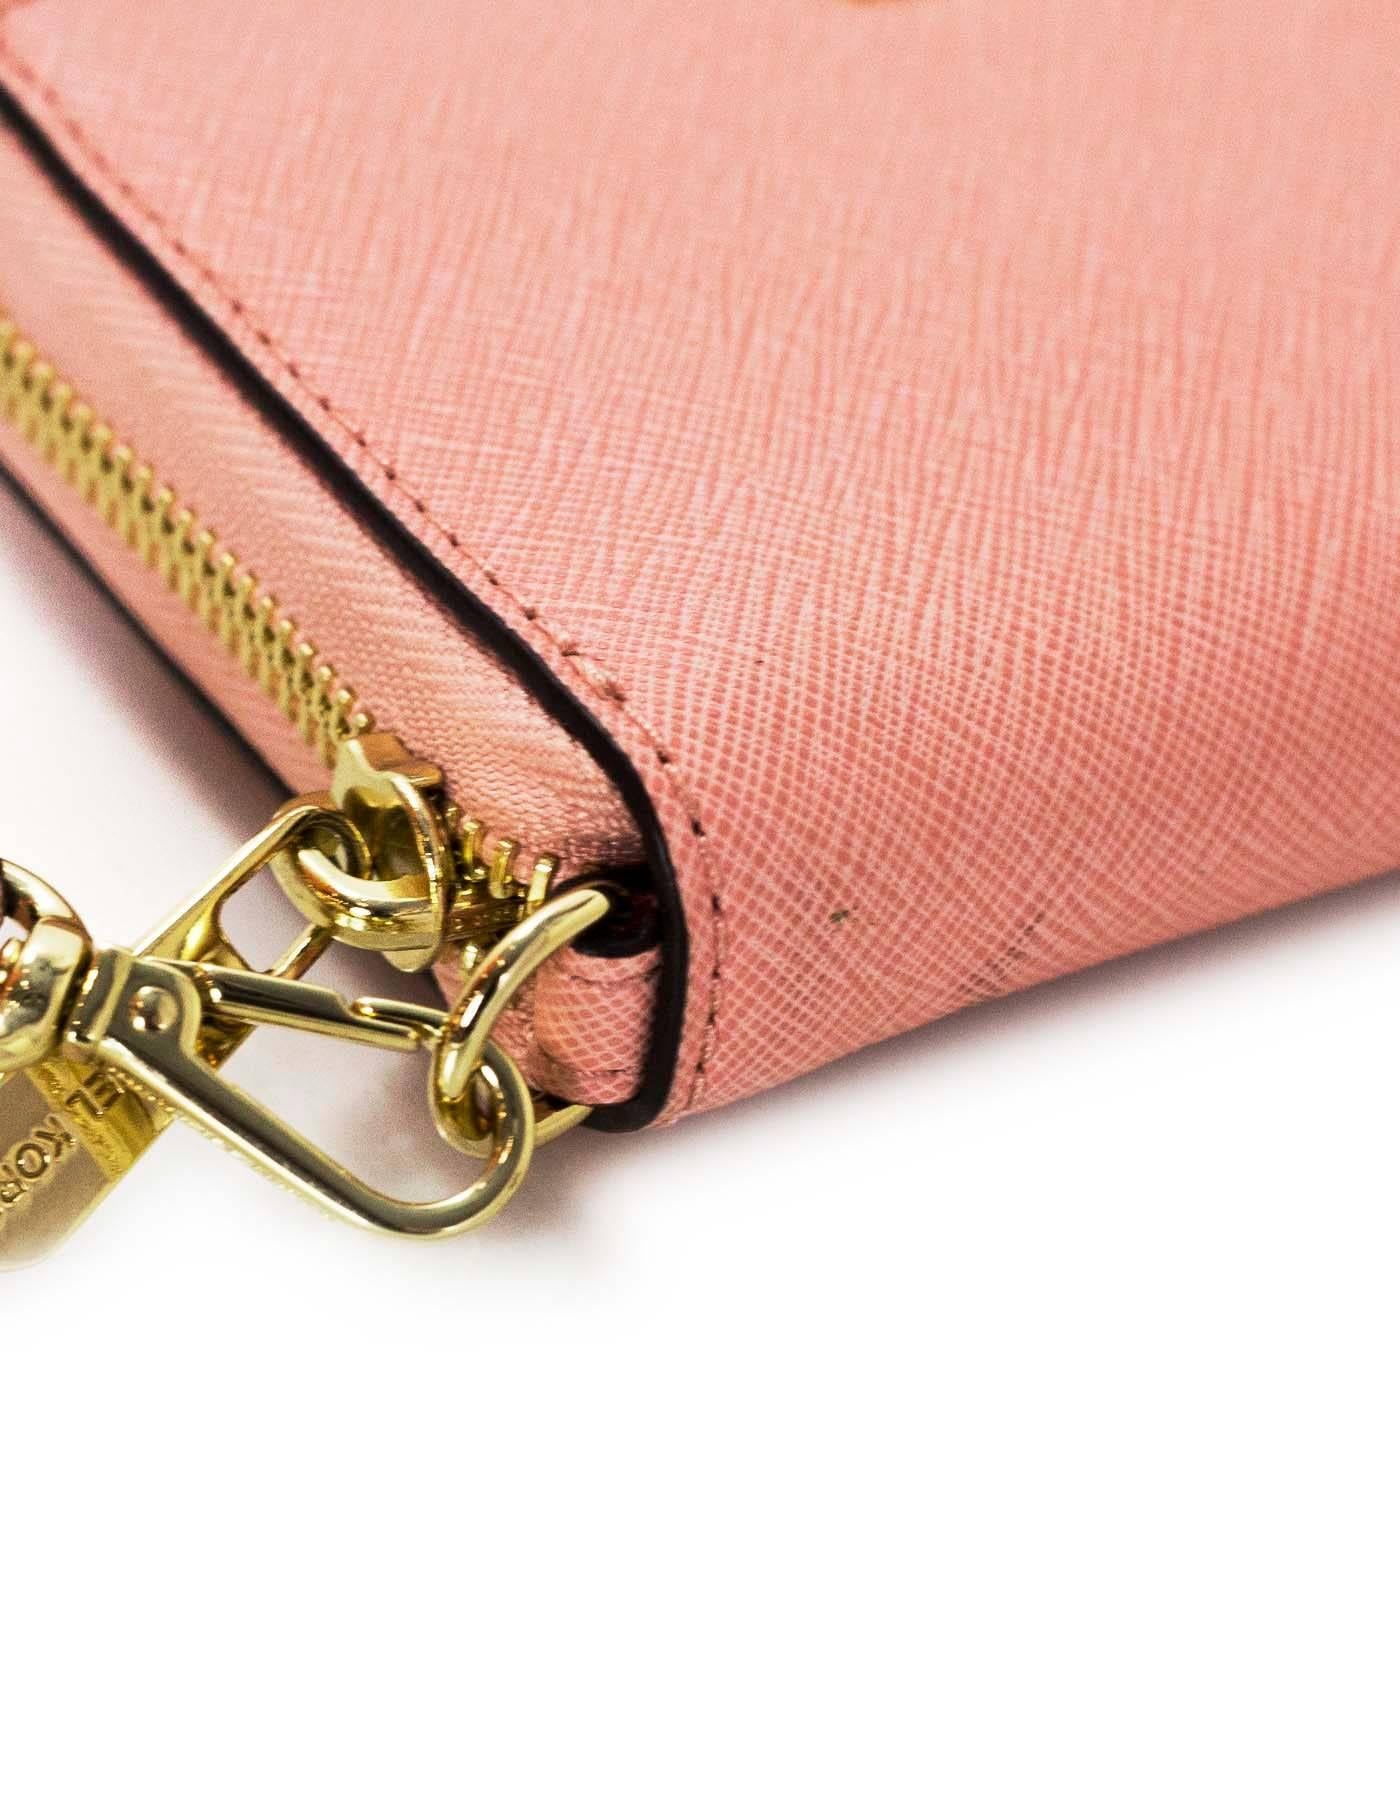 Michael Kors Pink Zippy Wallet/Wristlet In Excellent Condition In New York, NY